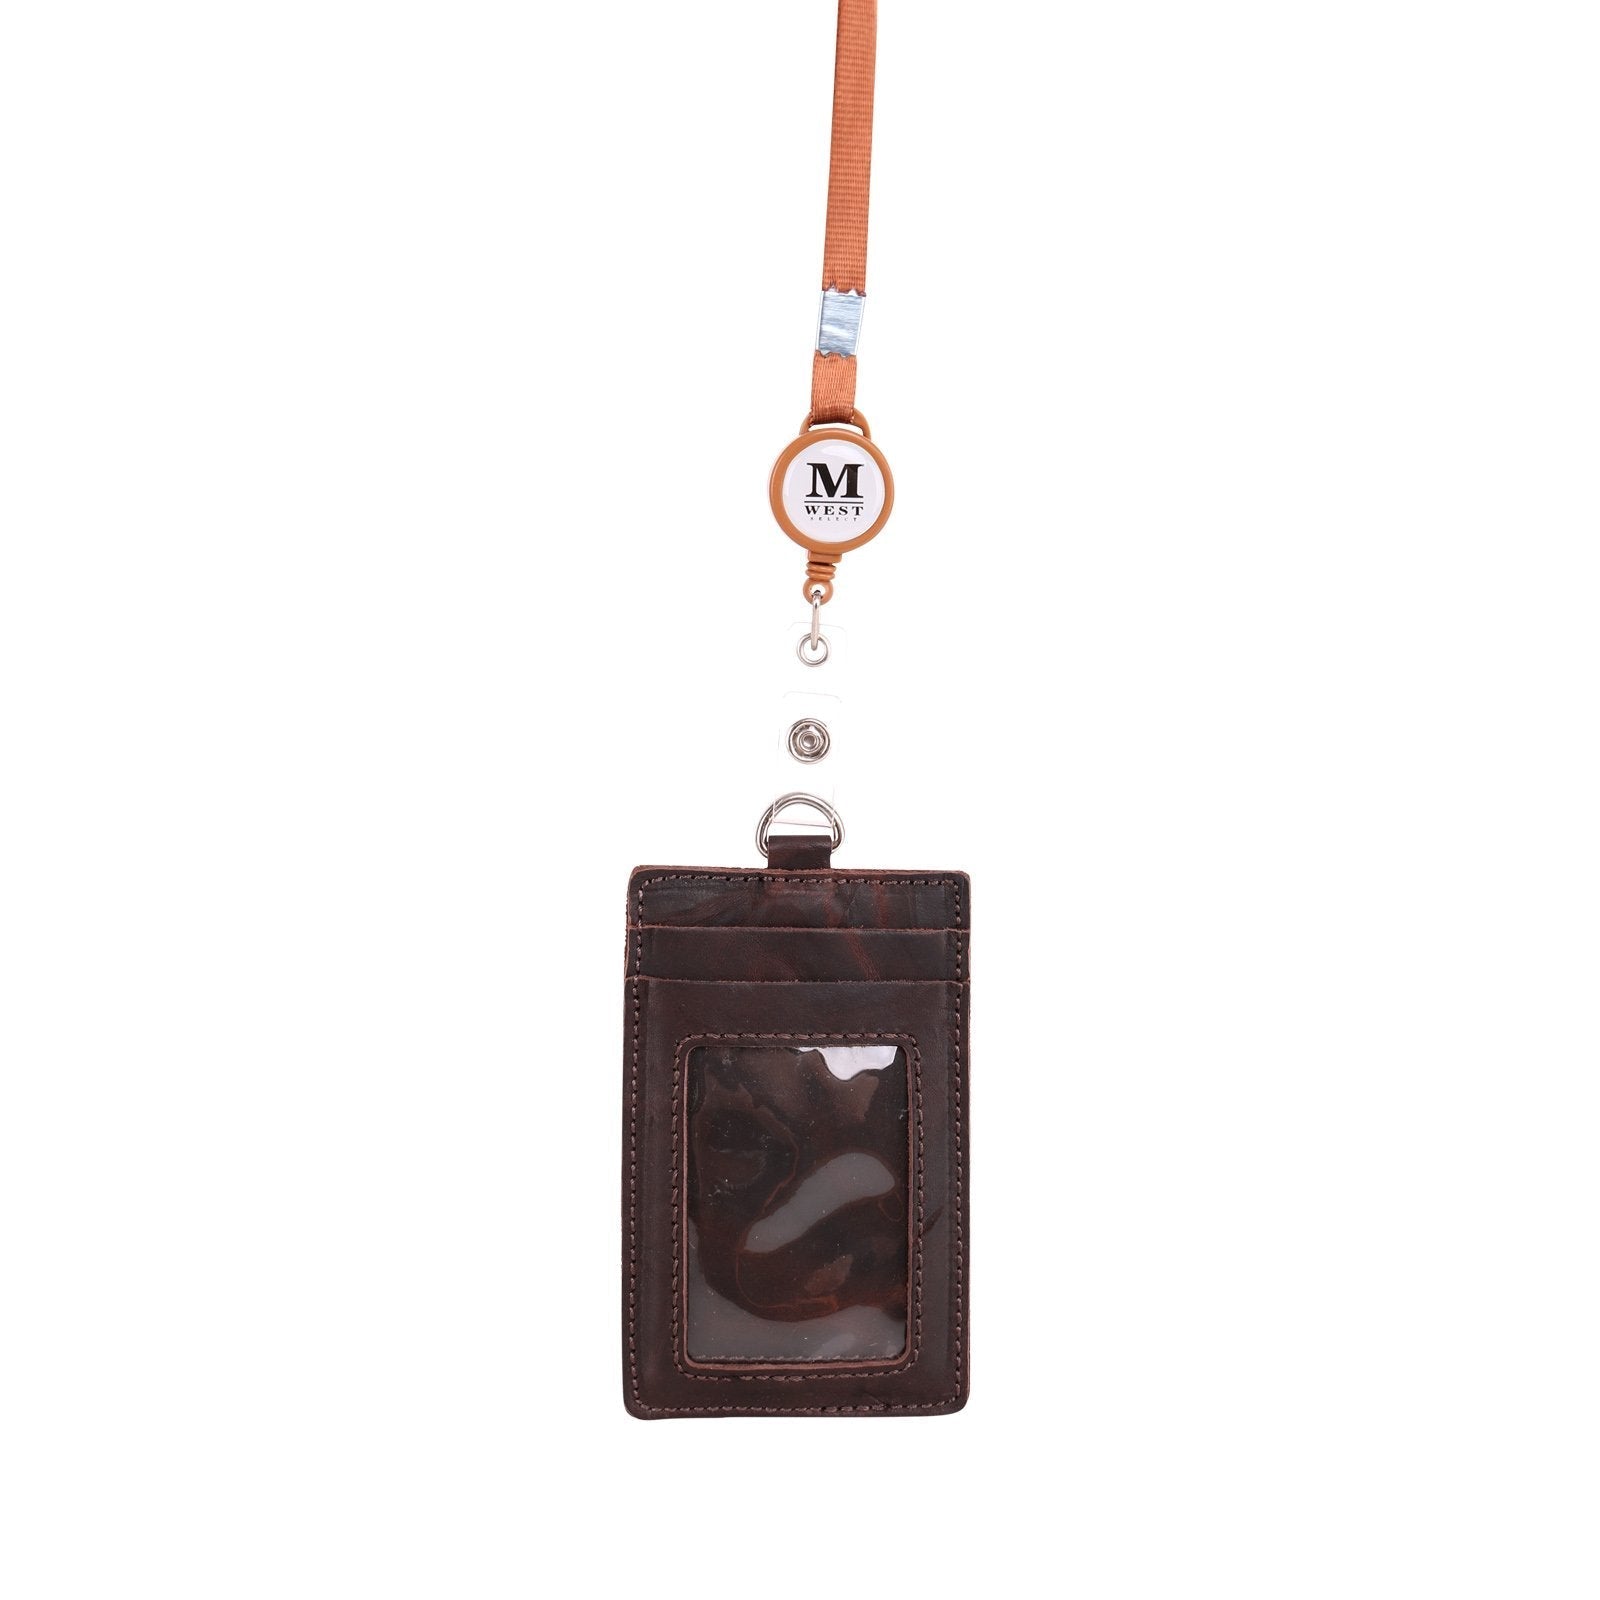 Montana West Genuine Leather Retractable ID Card Holder Reel Badge with Lanyard - Cowgirl Wear